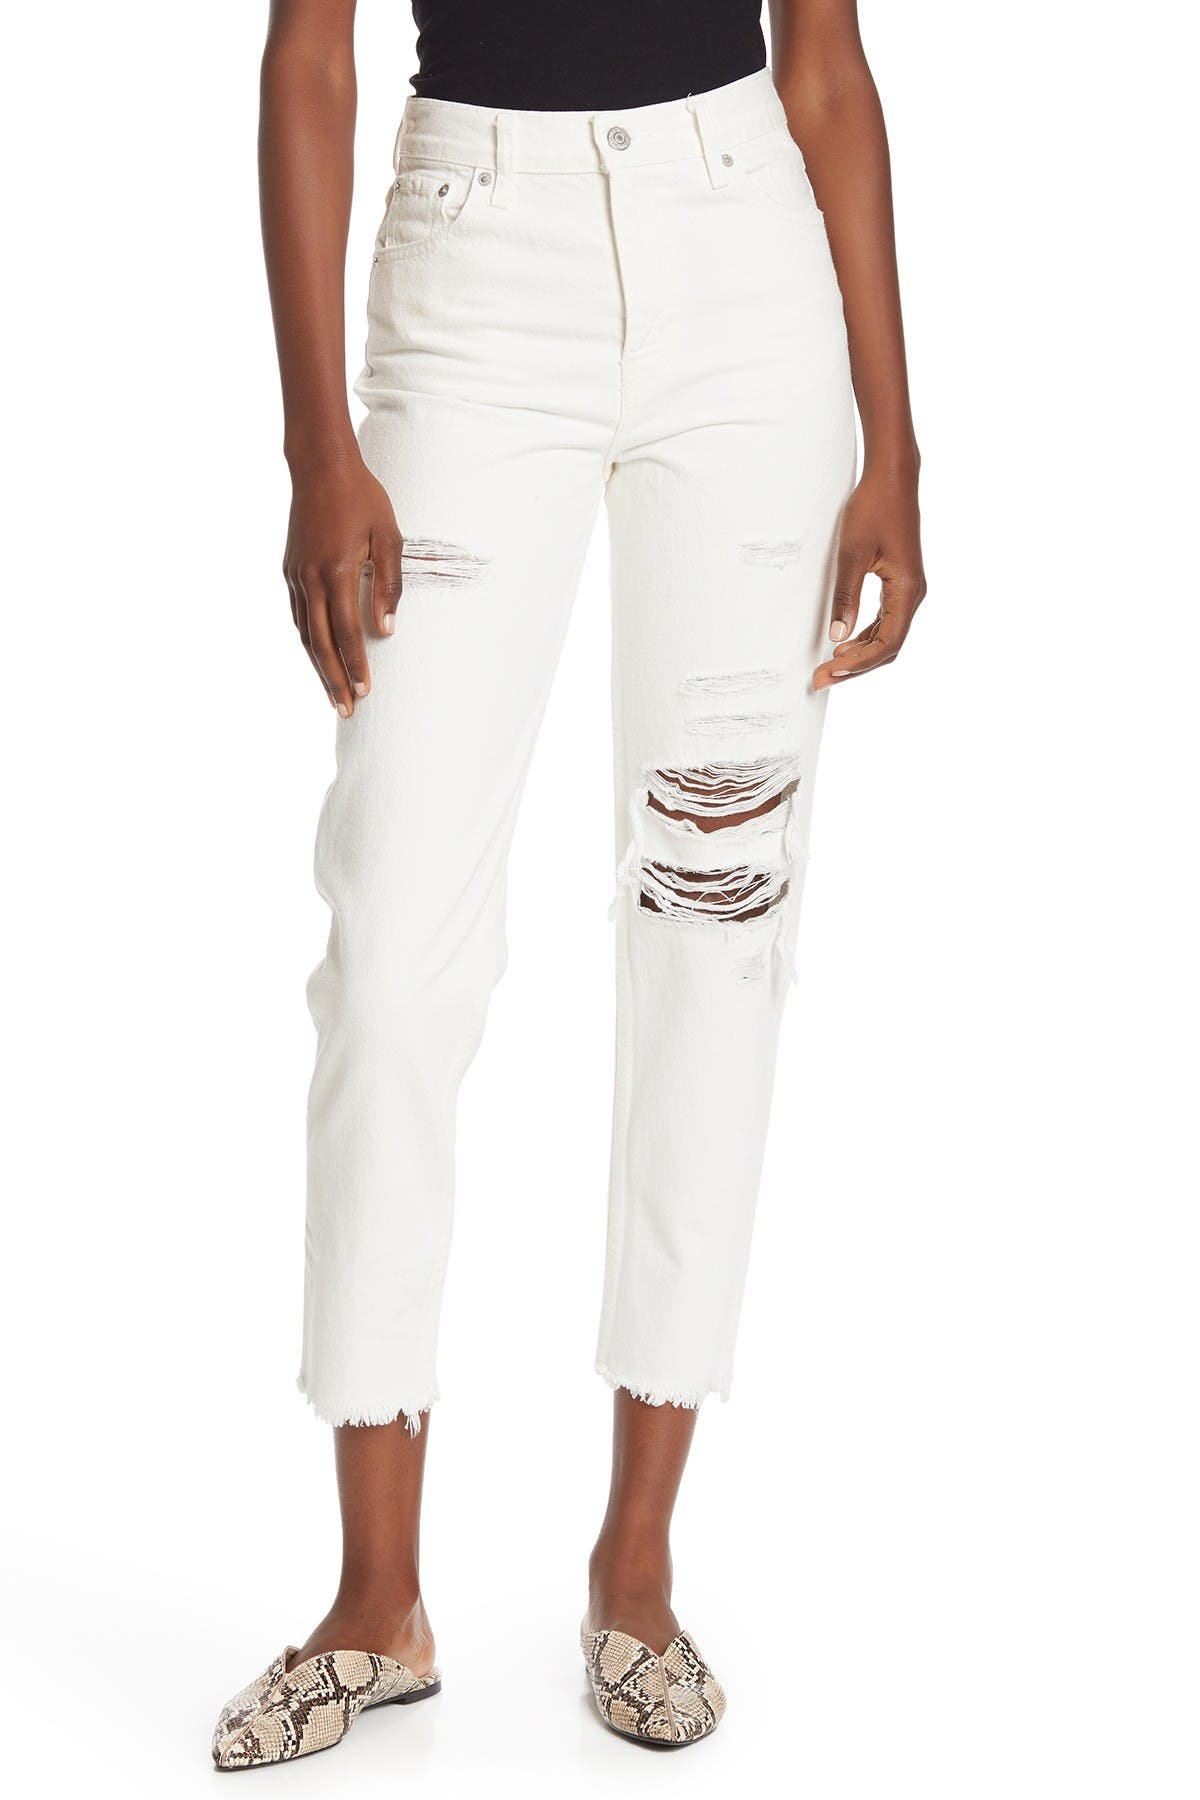 levis white mom jeans